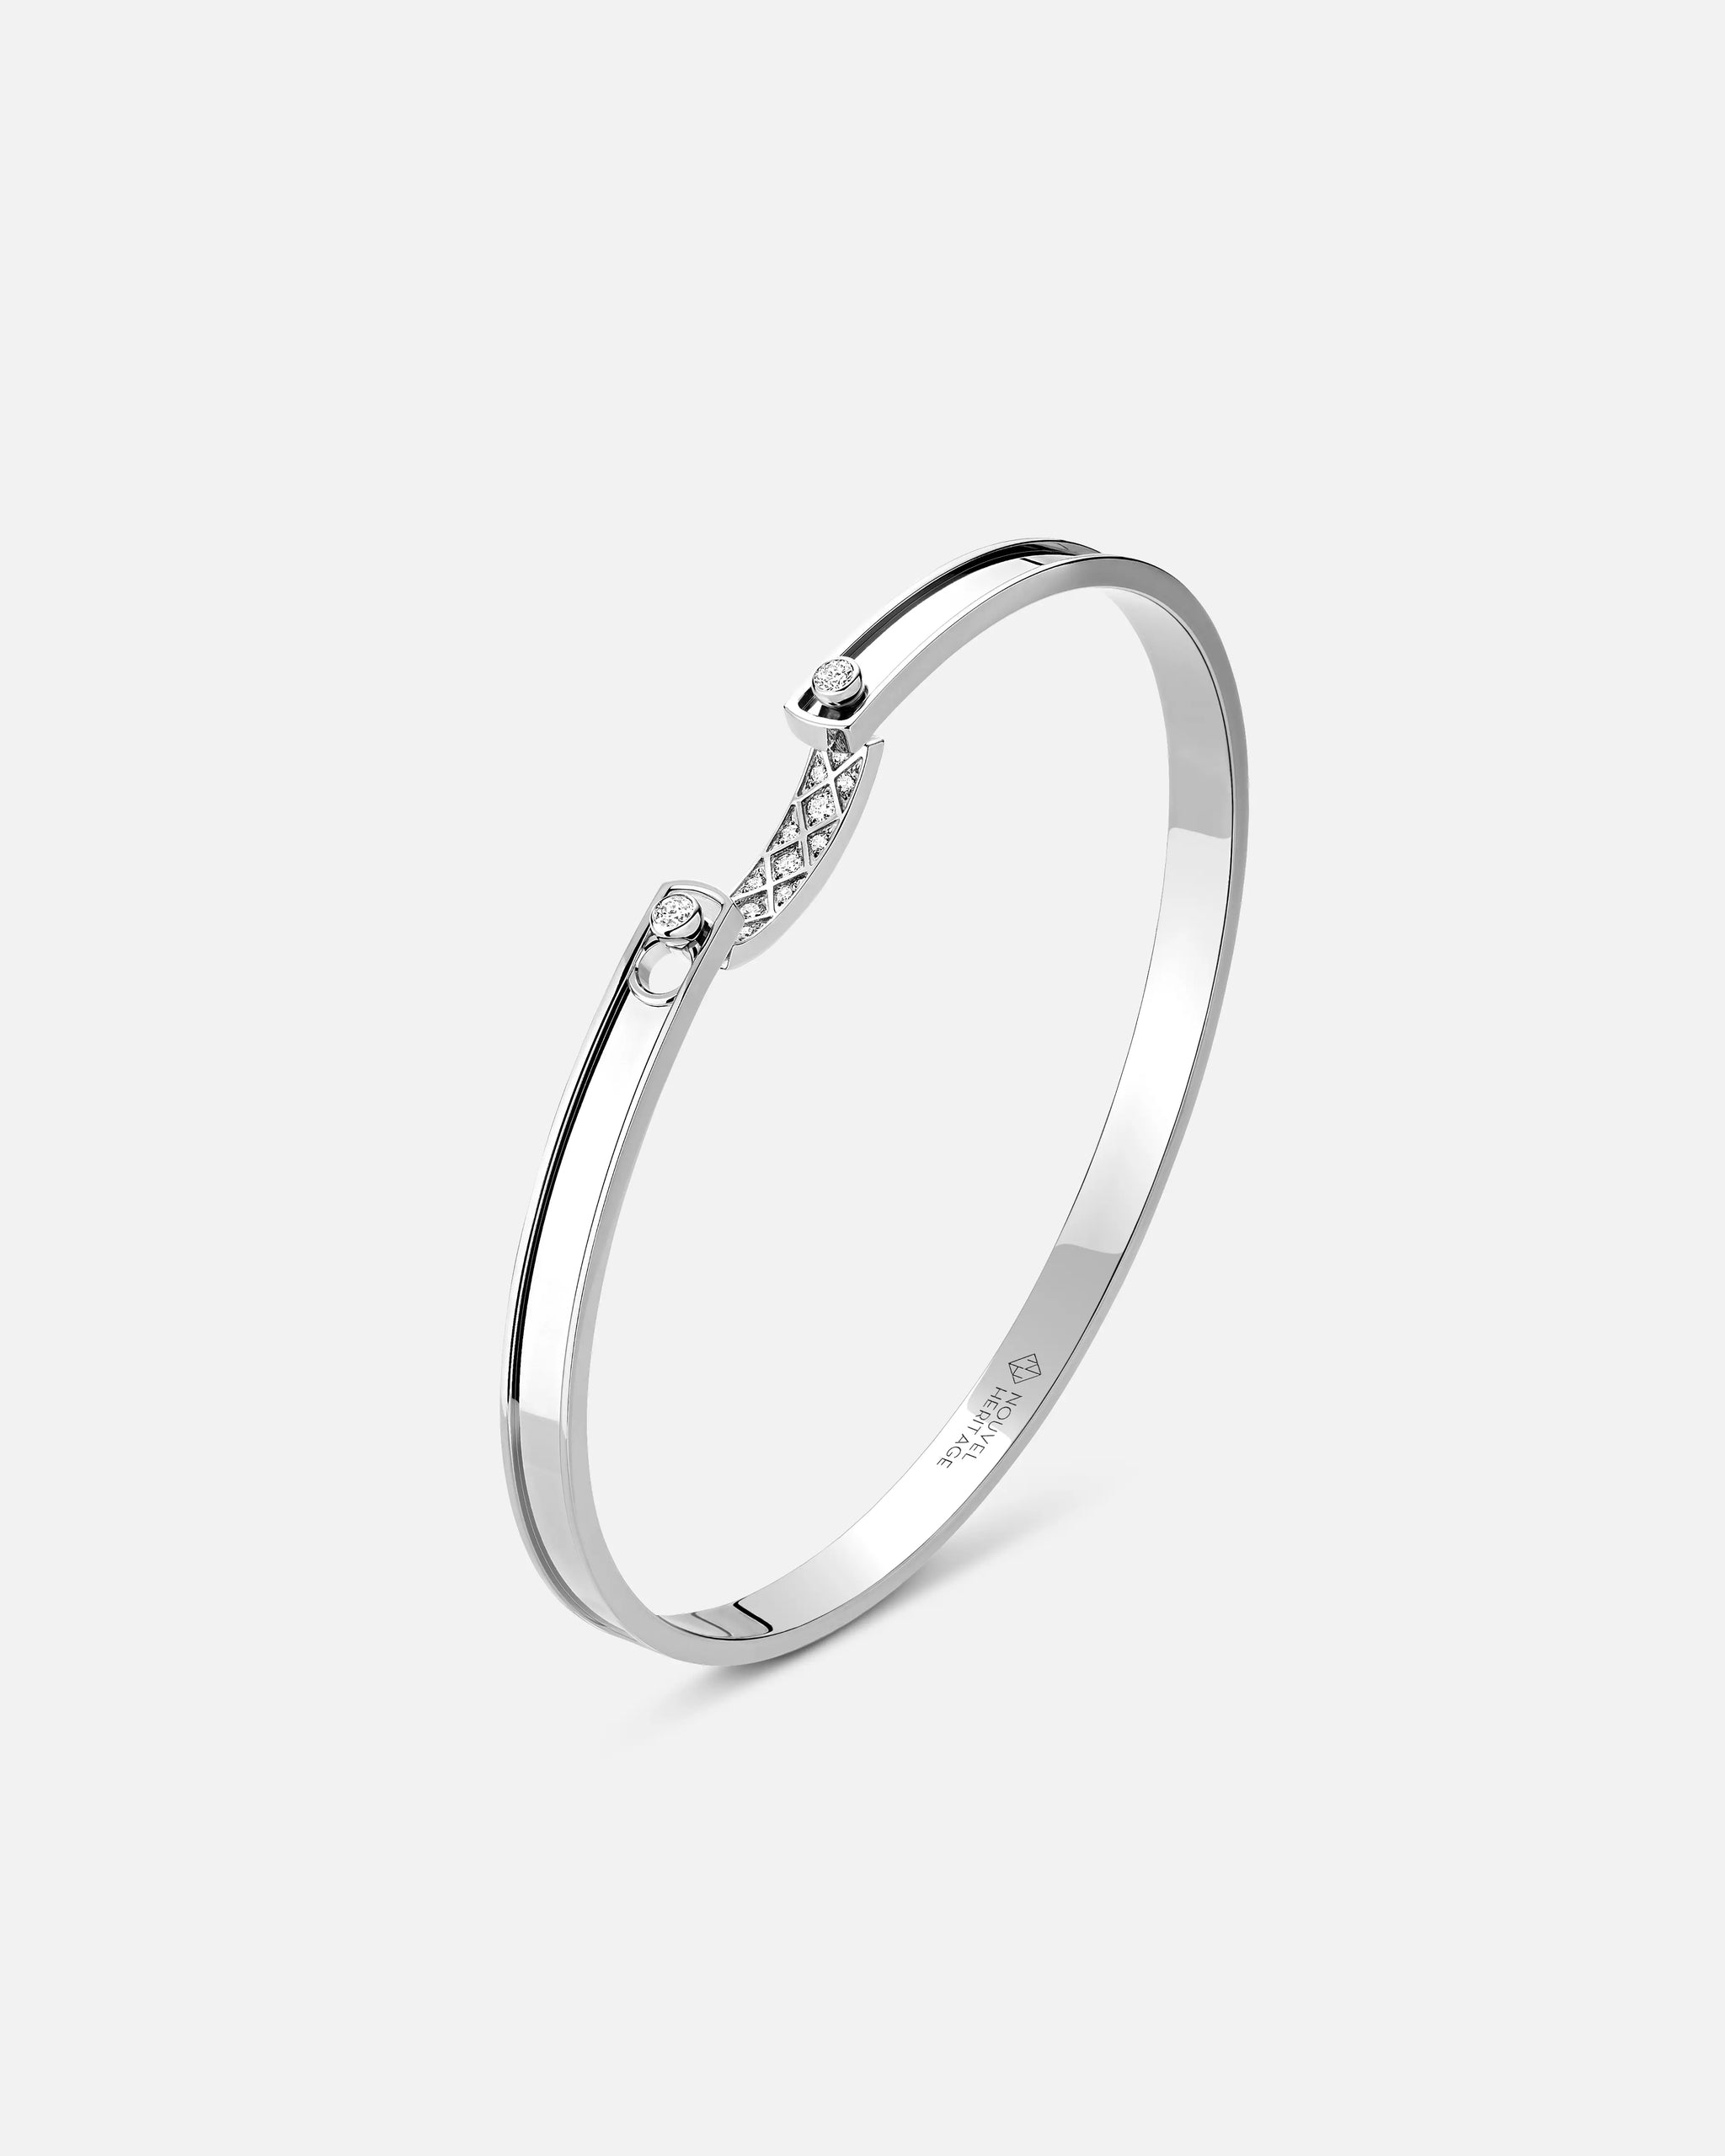 Parisian Stroll Mood Bangle in White Gold - 1 - Nouvel Heritage